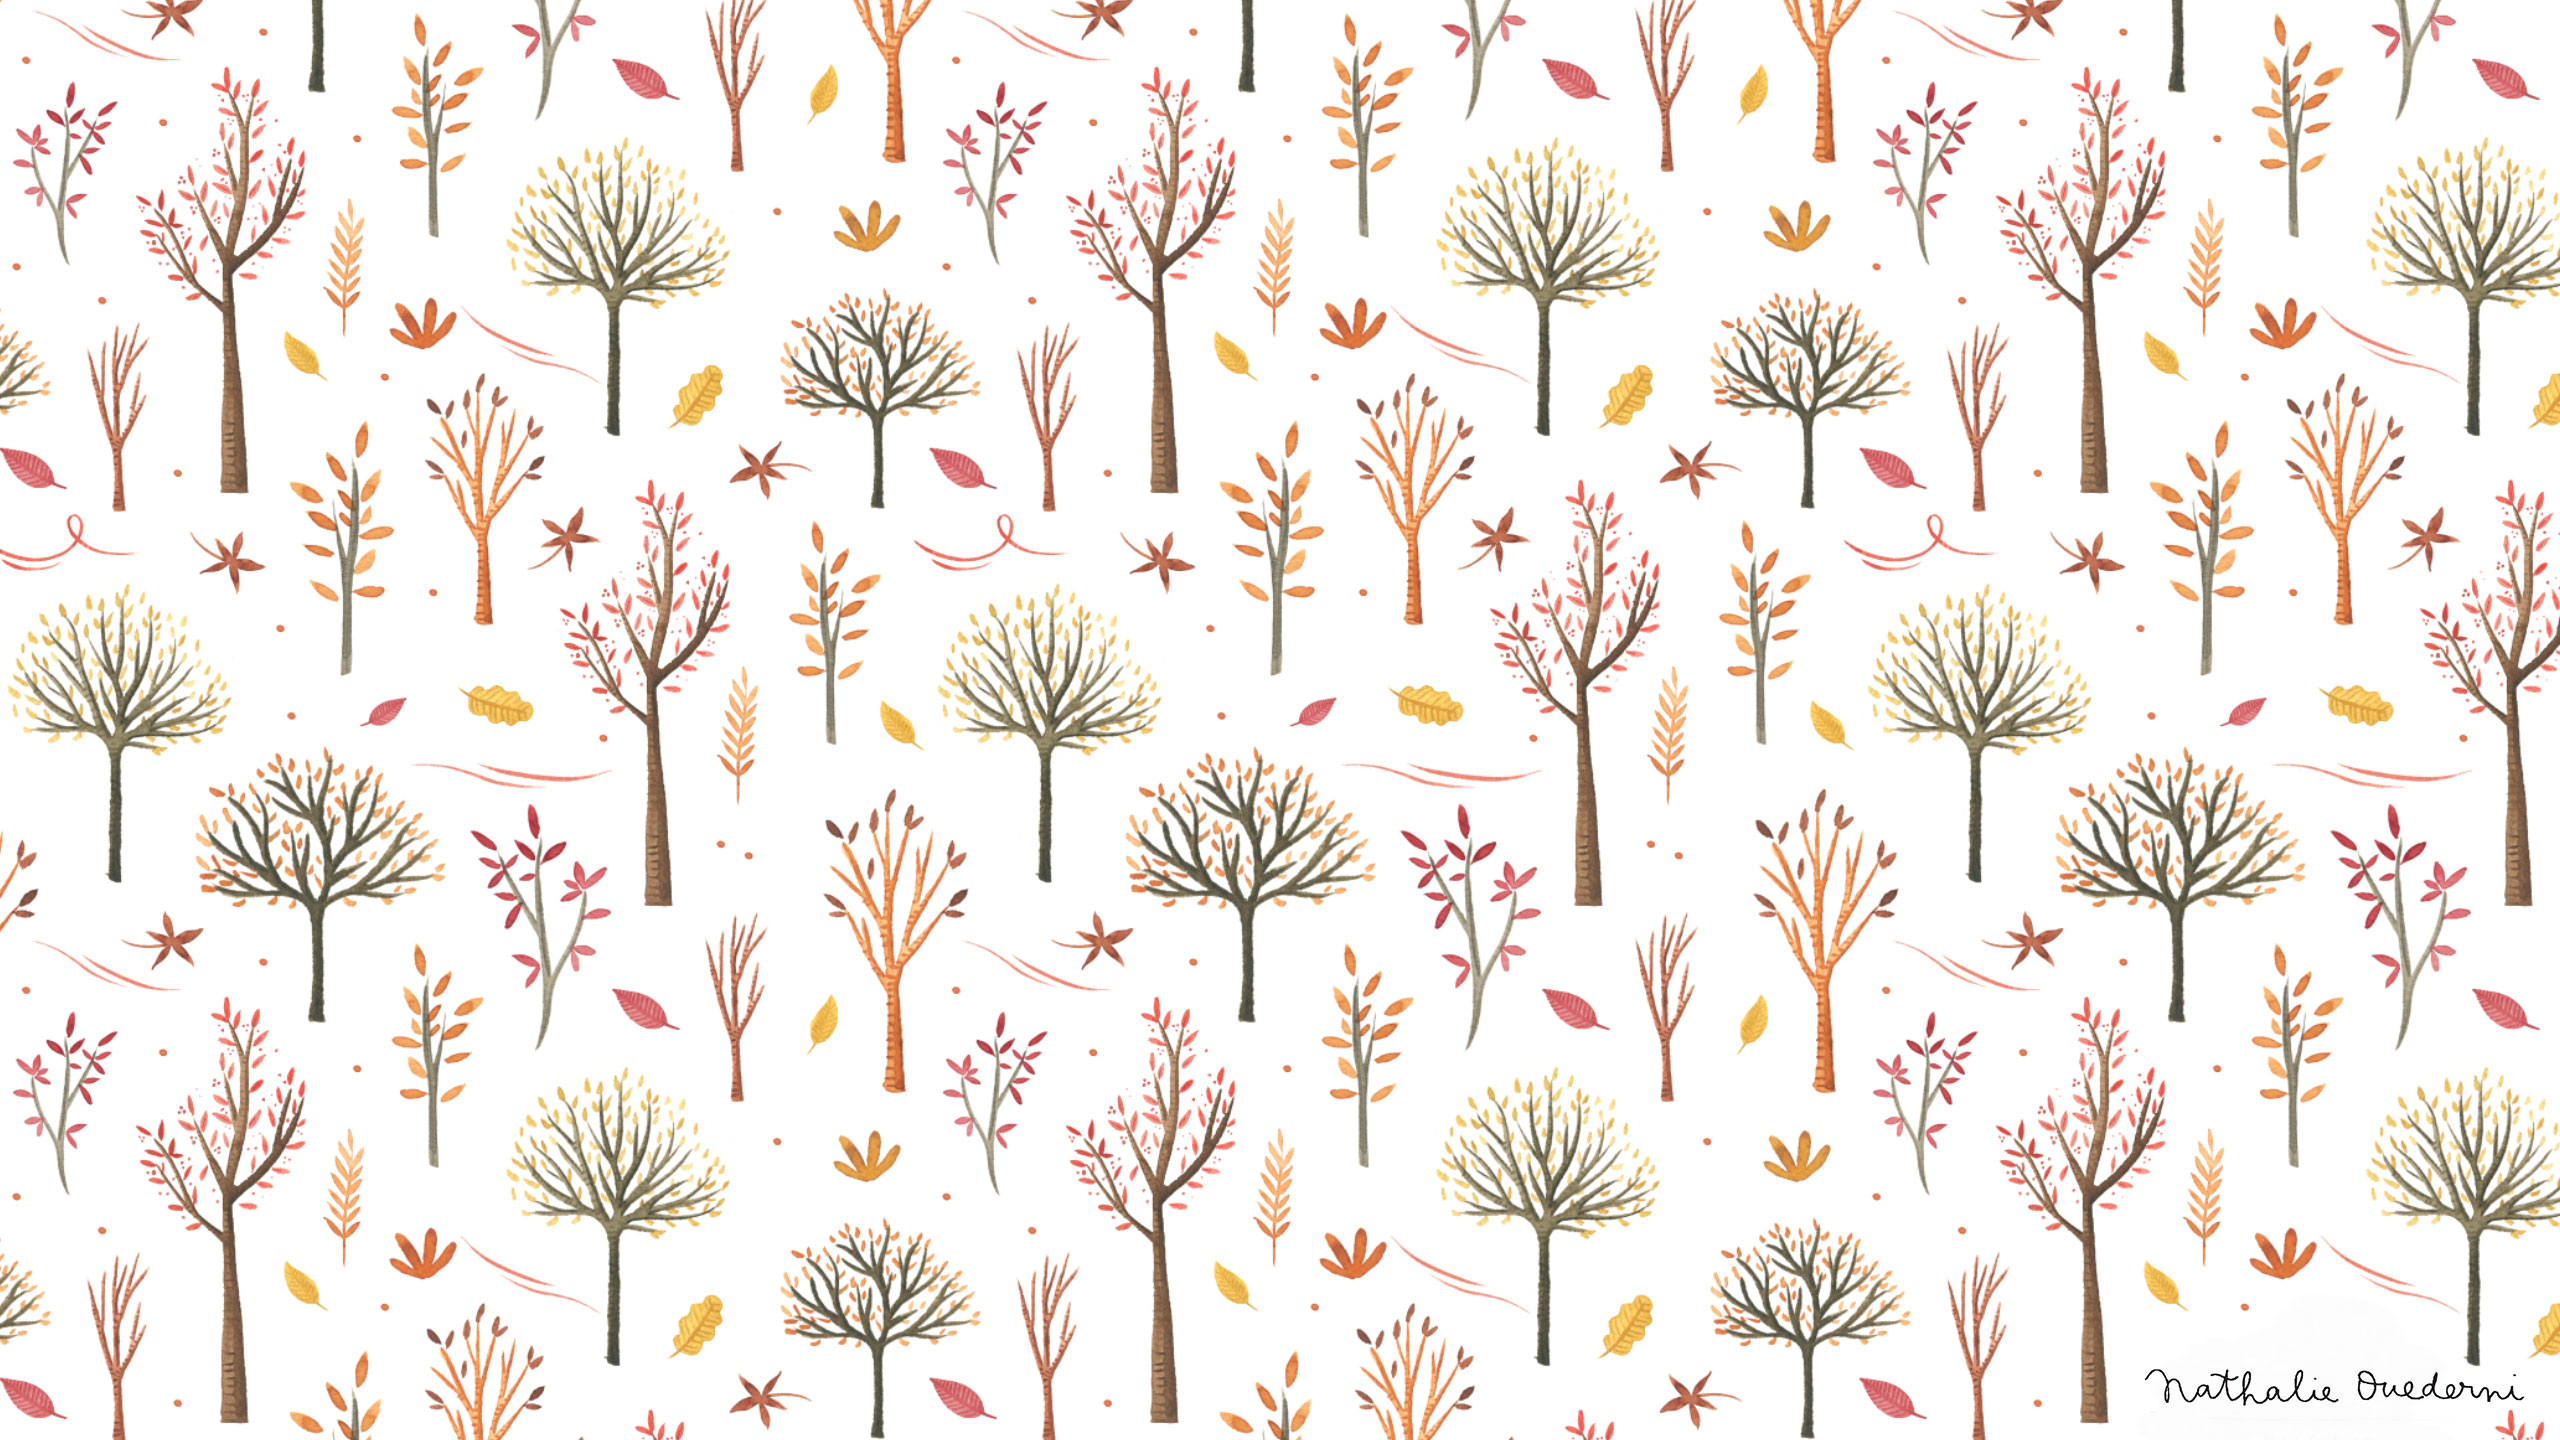 A pattern of trees and leaves on white - October